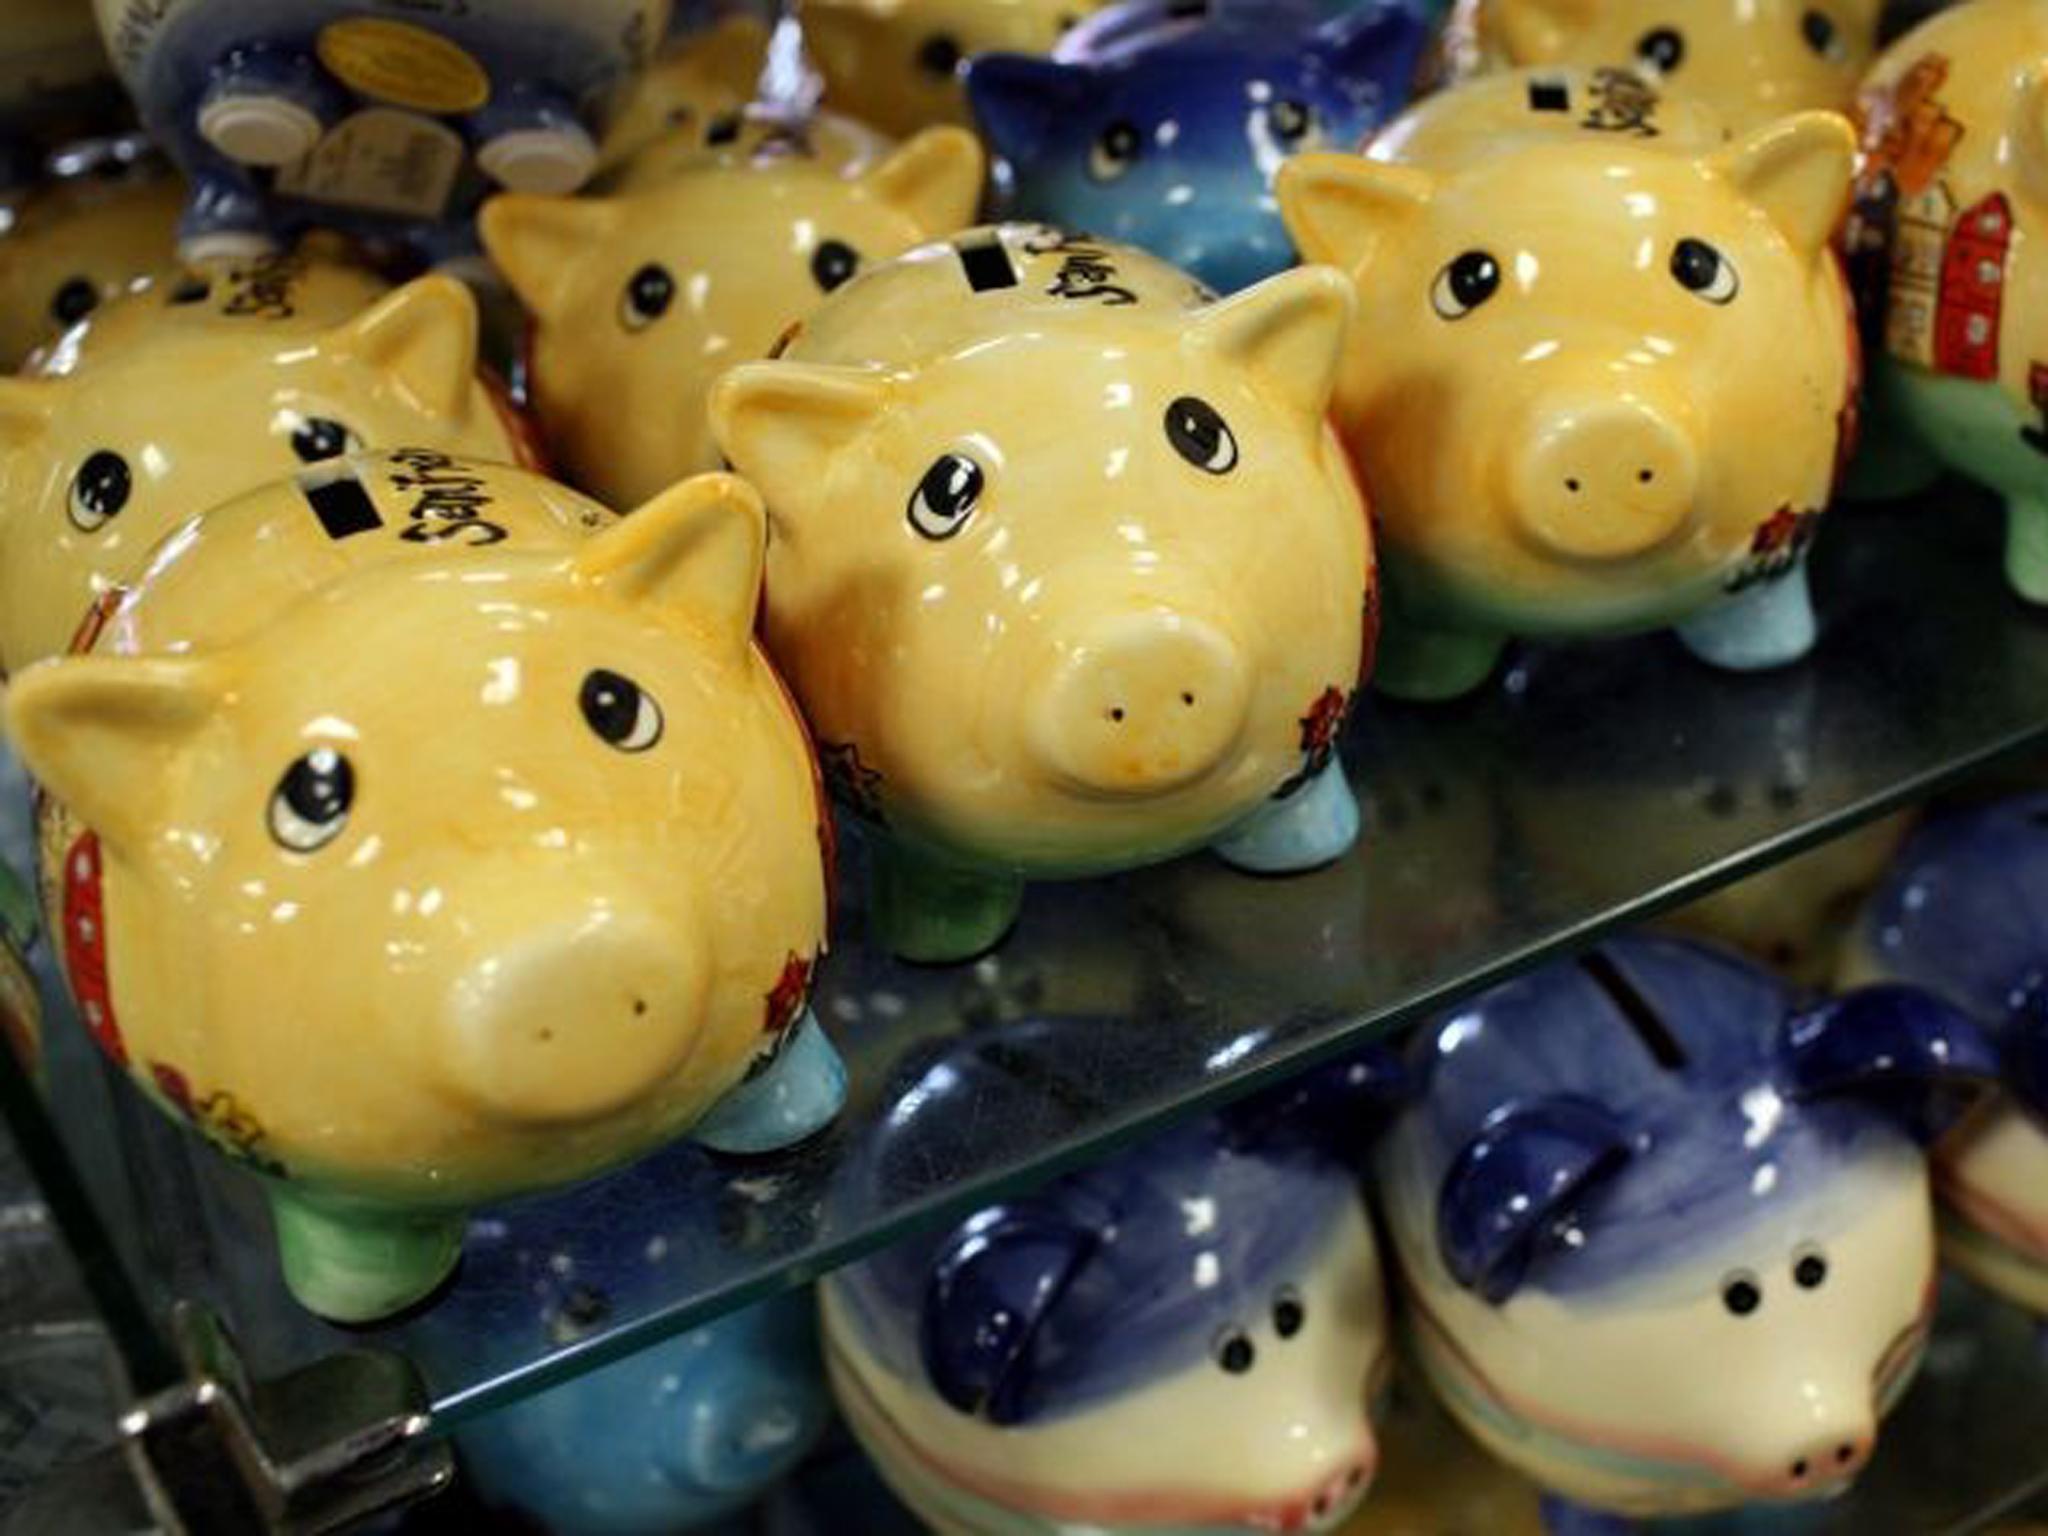 Regular savings accounts are not offering much more interest than piggy banks at the moment